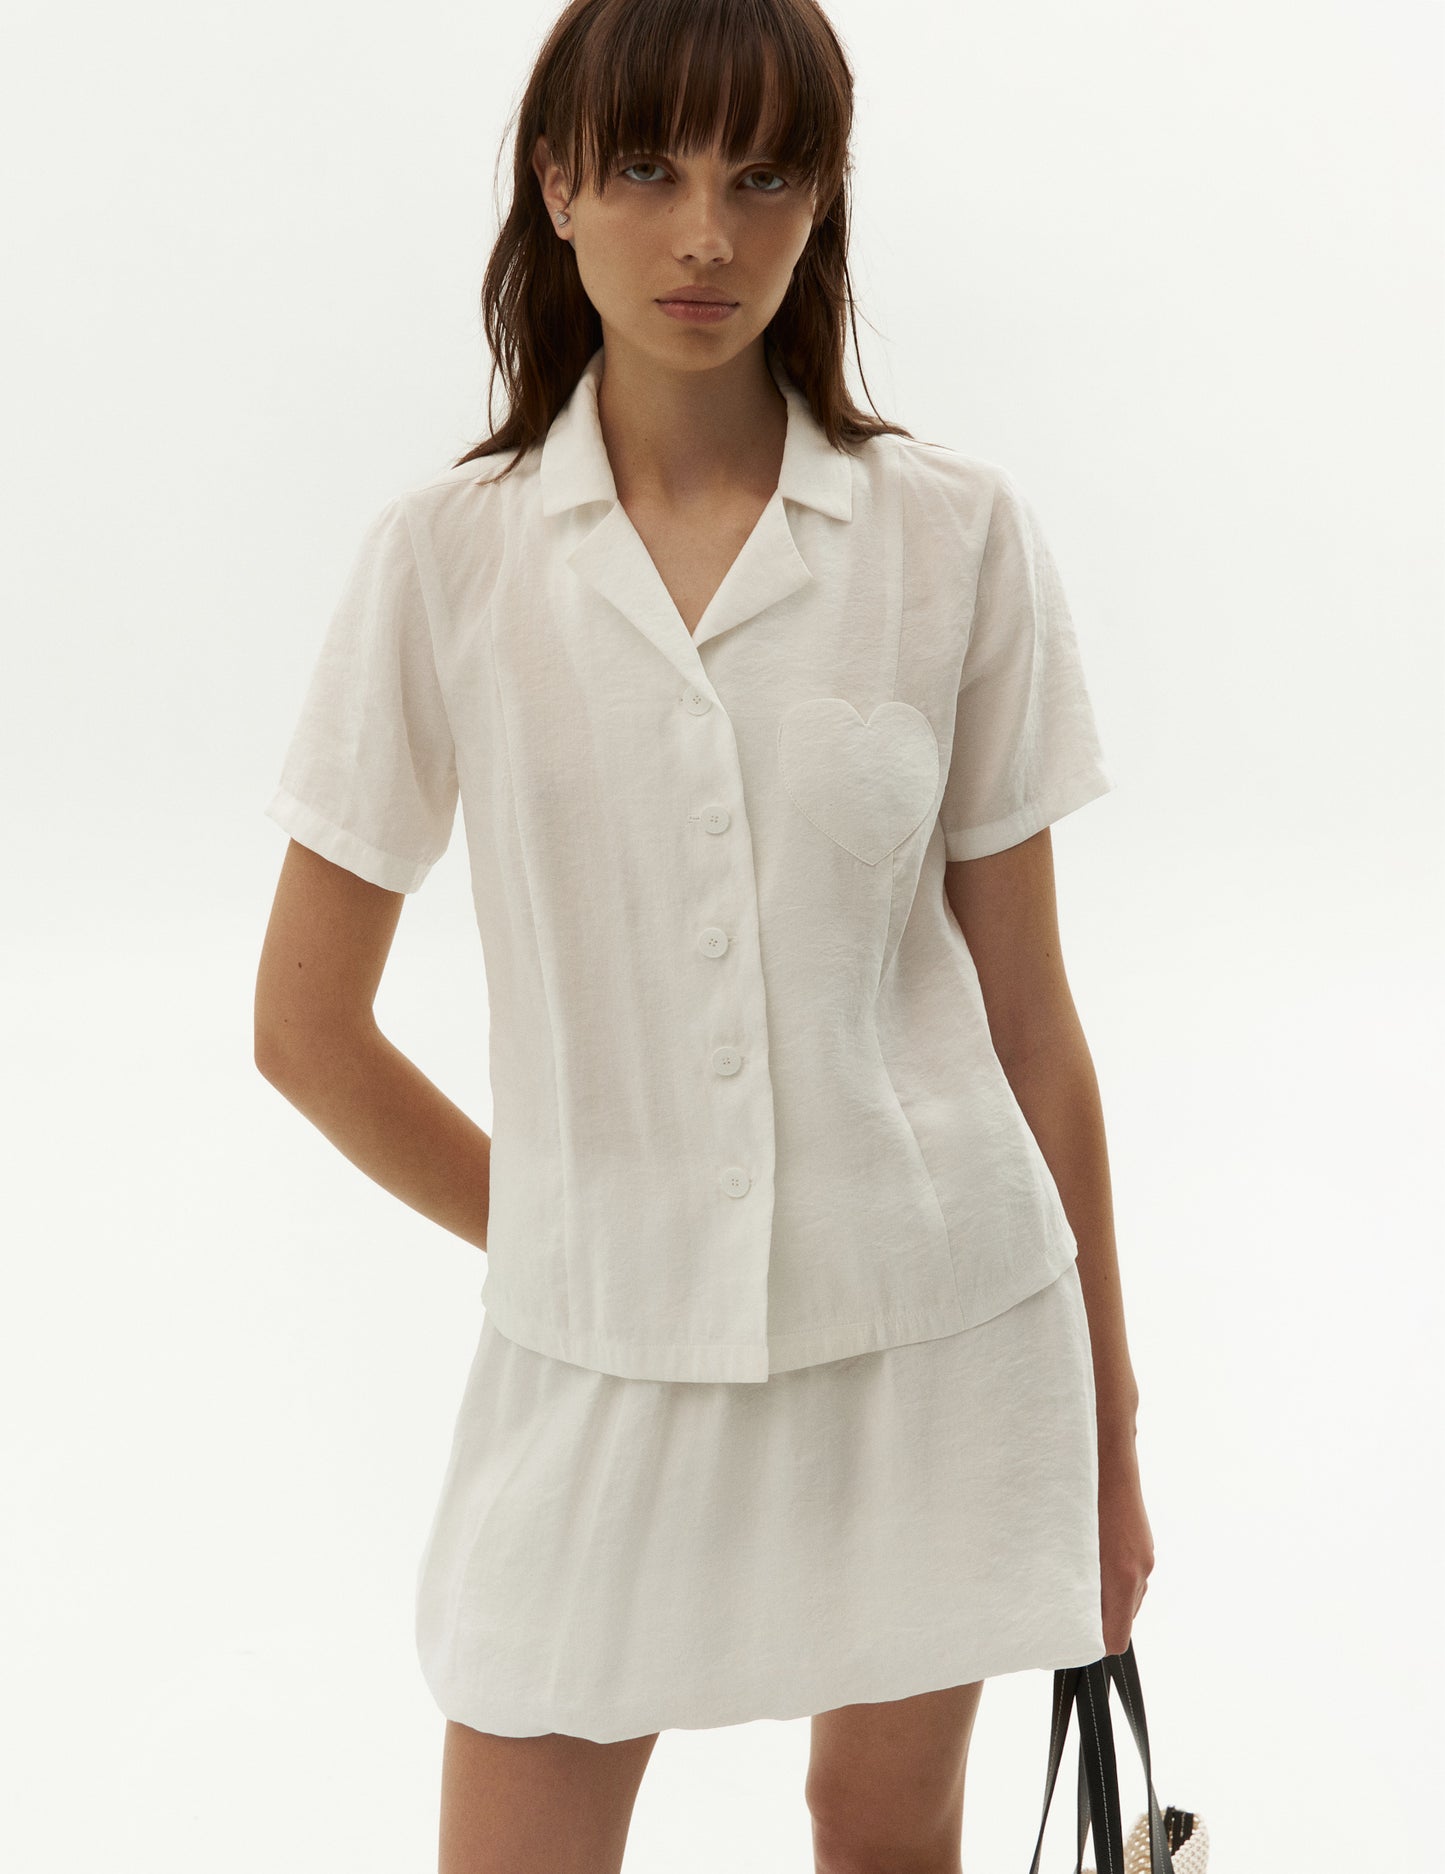 stunning white shirt, featuring a chic lapel collar, short sleeves, and a straight hem. The shirt is designed with a unique twist, featuring a chest heart patch pocket for added style. With a flattering side slit and a front button fastening, this shirt is perfect for any occasion. Match this with our viscose white balloon skirt and wear it like a suit for a stylish and coordinated look, FORMA fashion brand